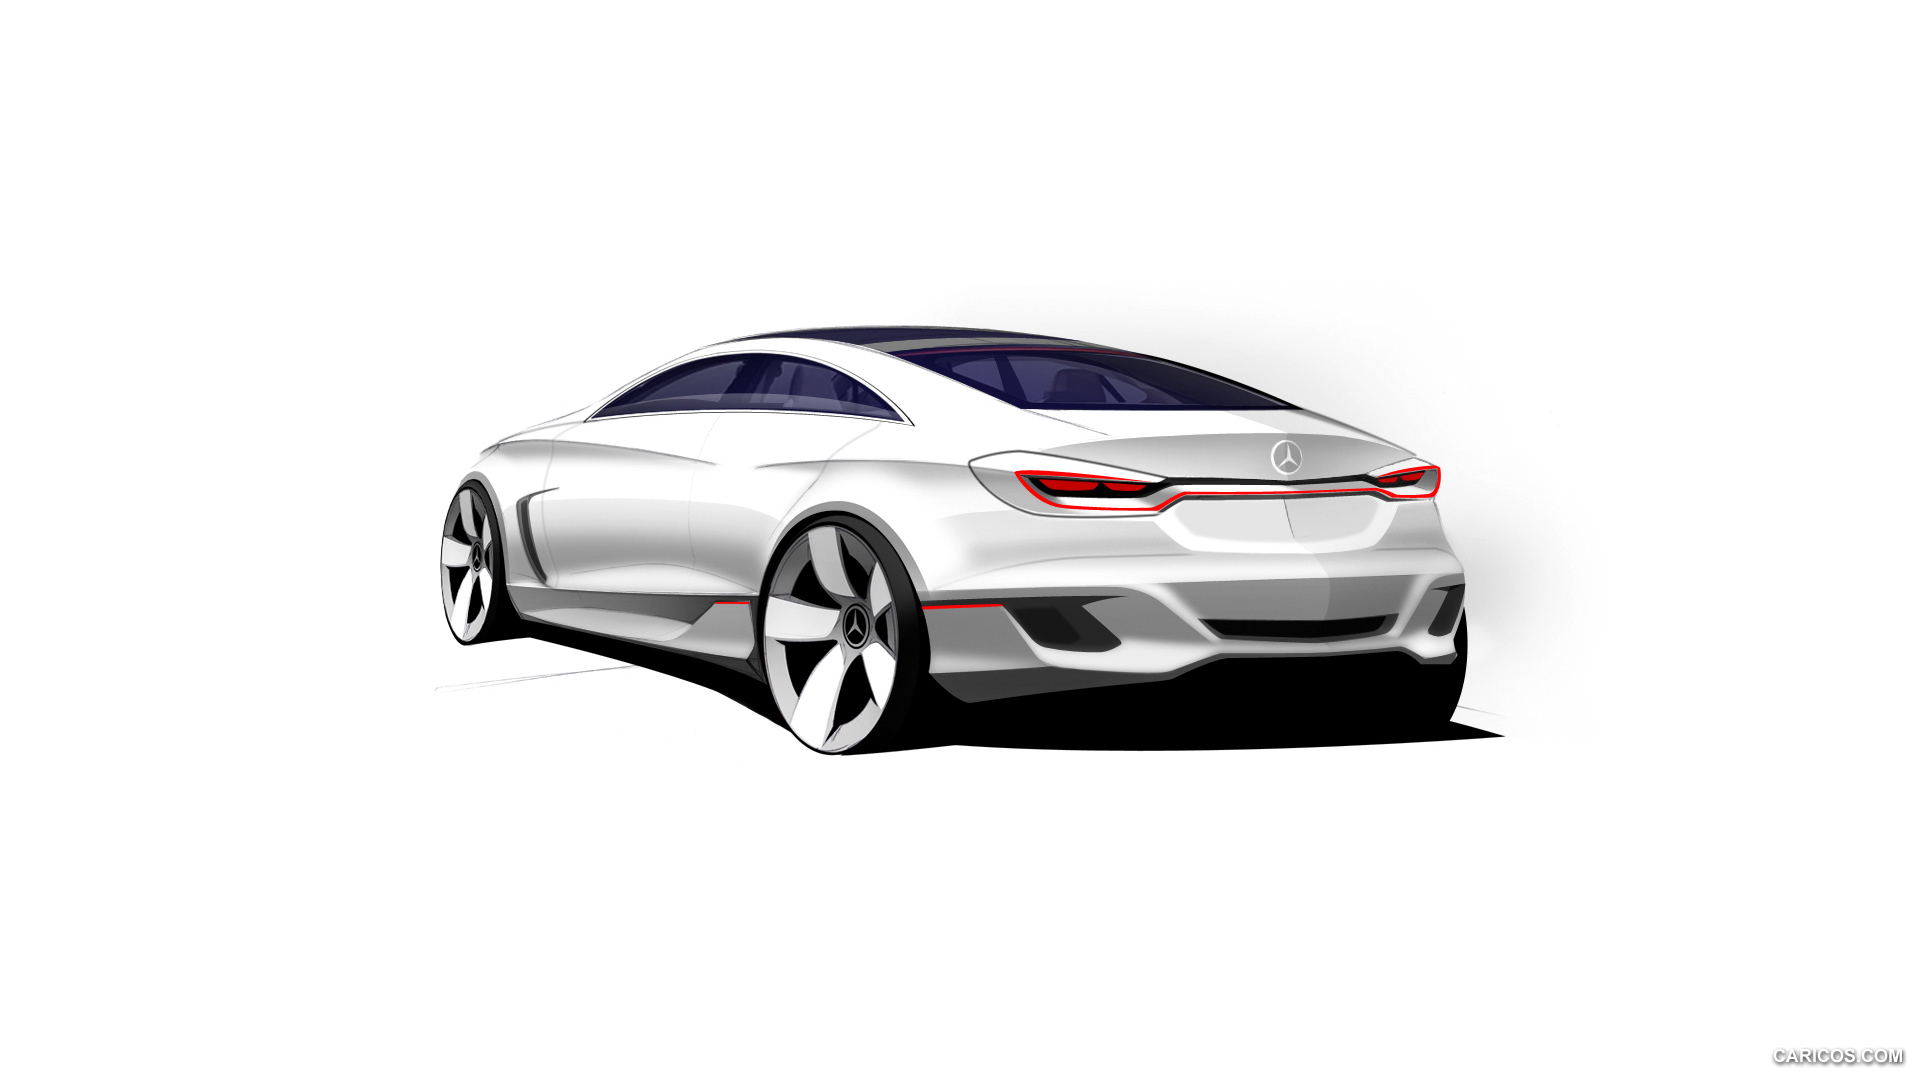 Mercedes-Benz F800 Style Concept (2010)  - Design Sketch, #83 of 120